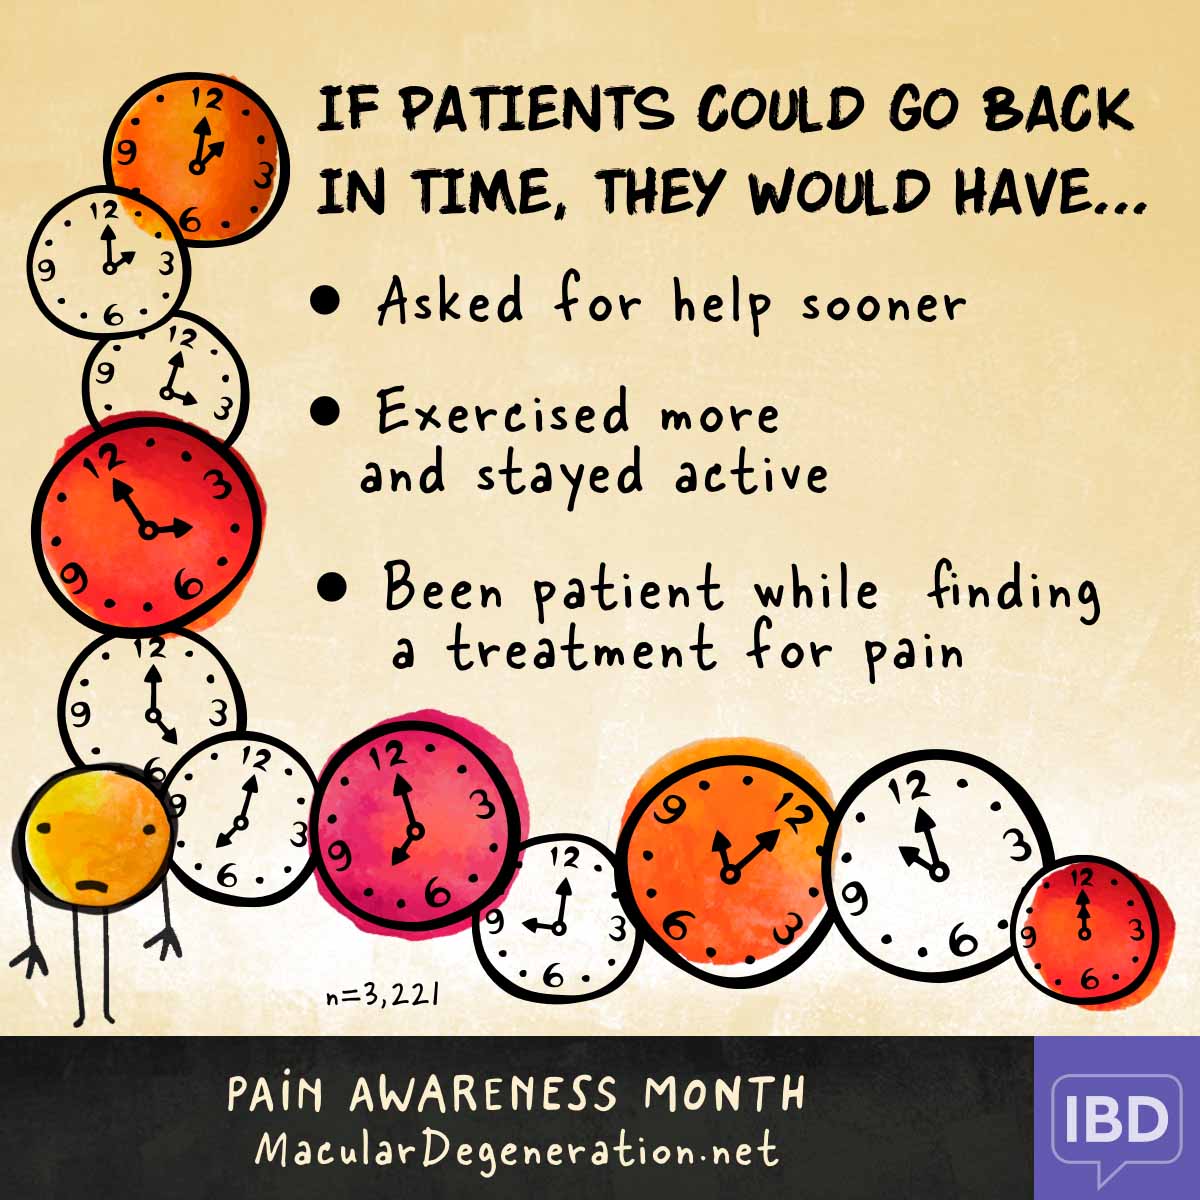 People with pain wish that they had asked for help, stayed active, and been patient with treatment